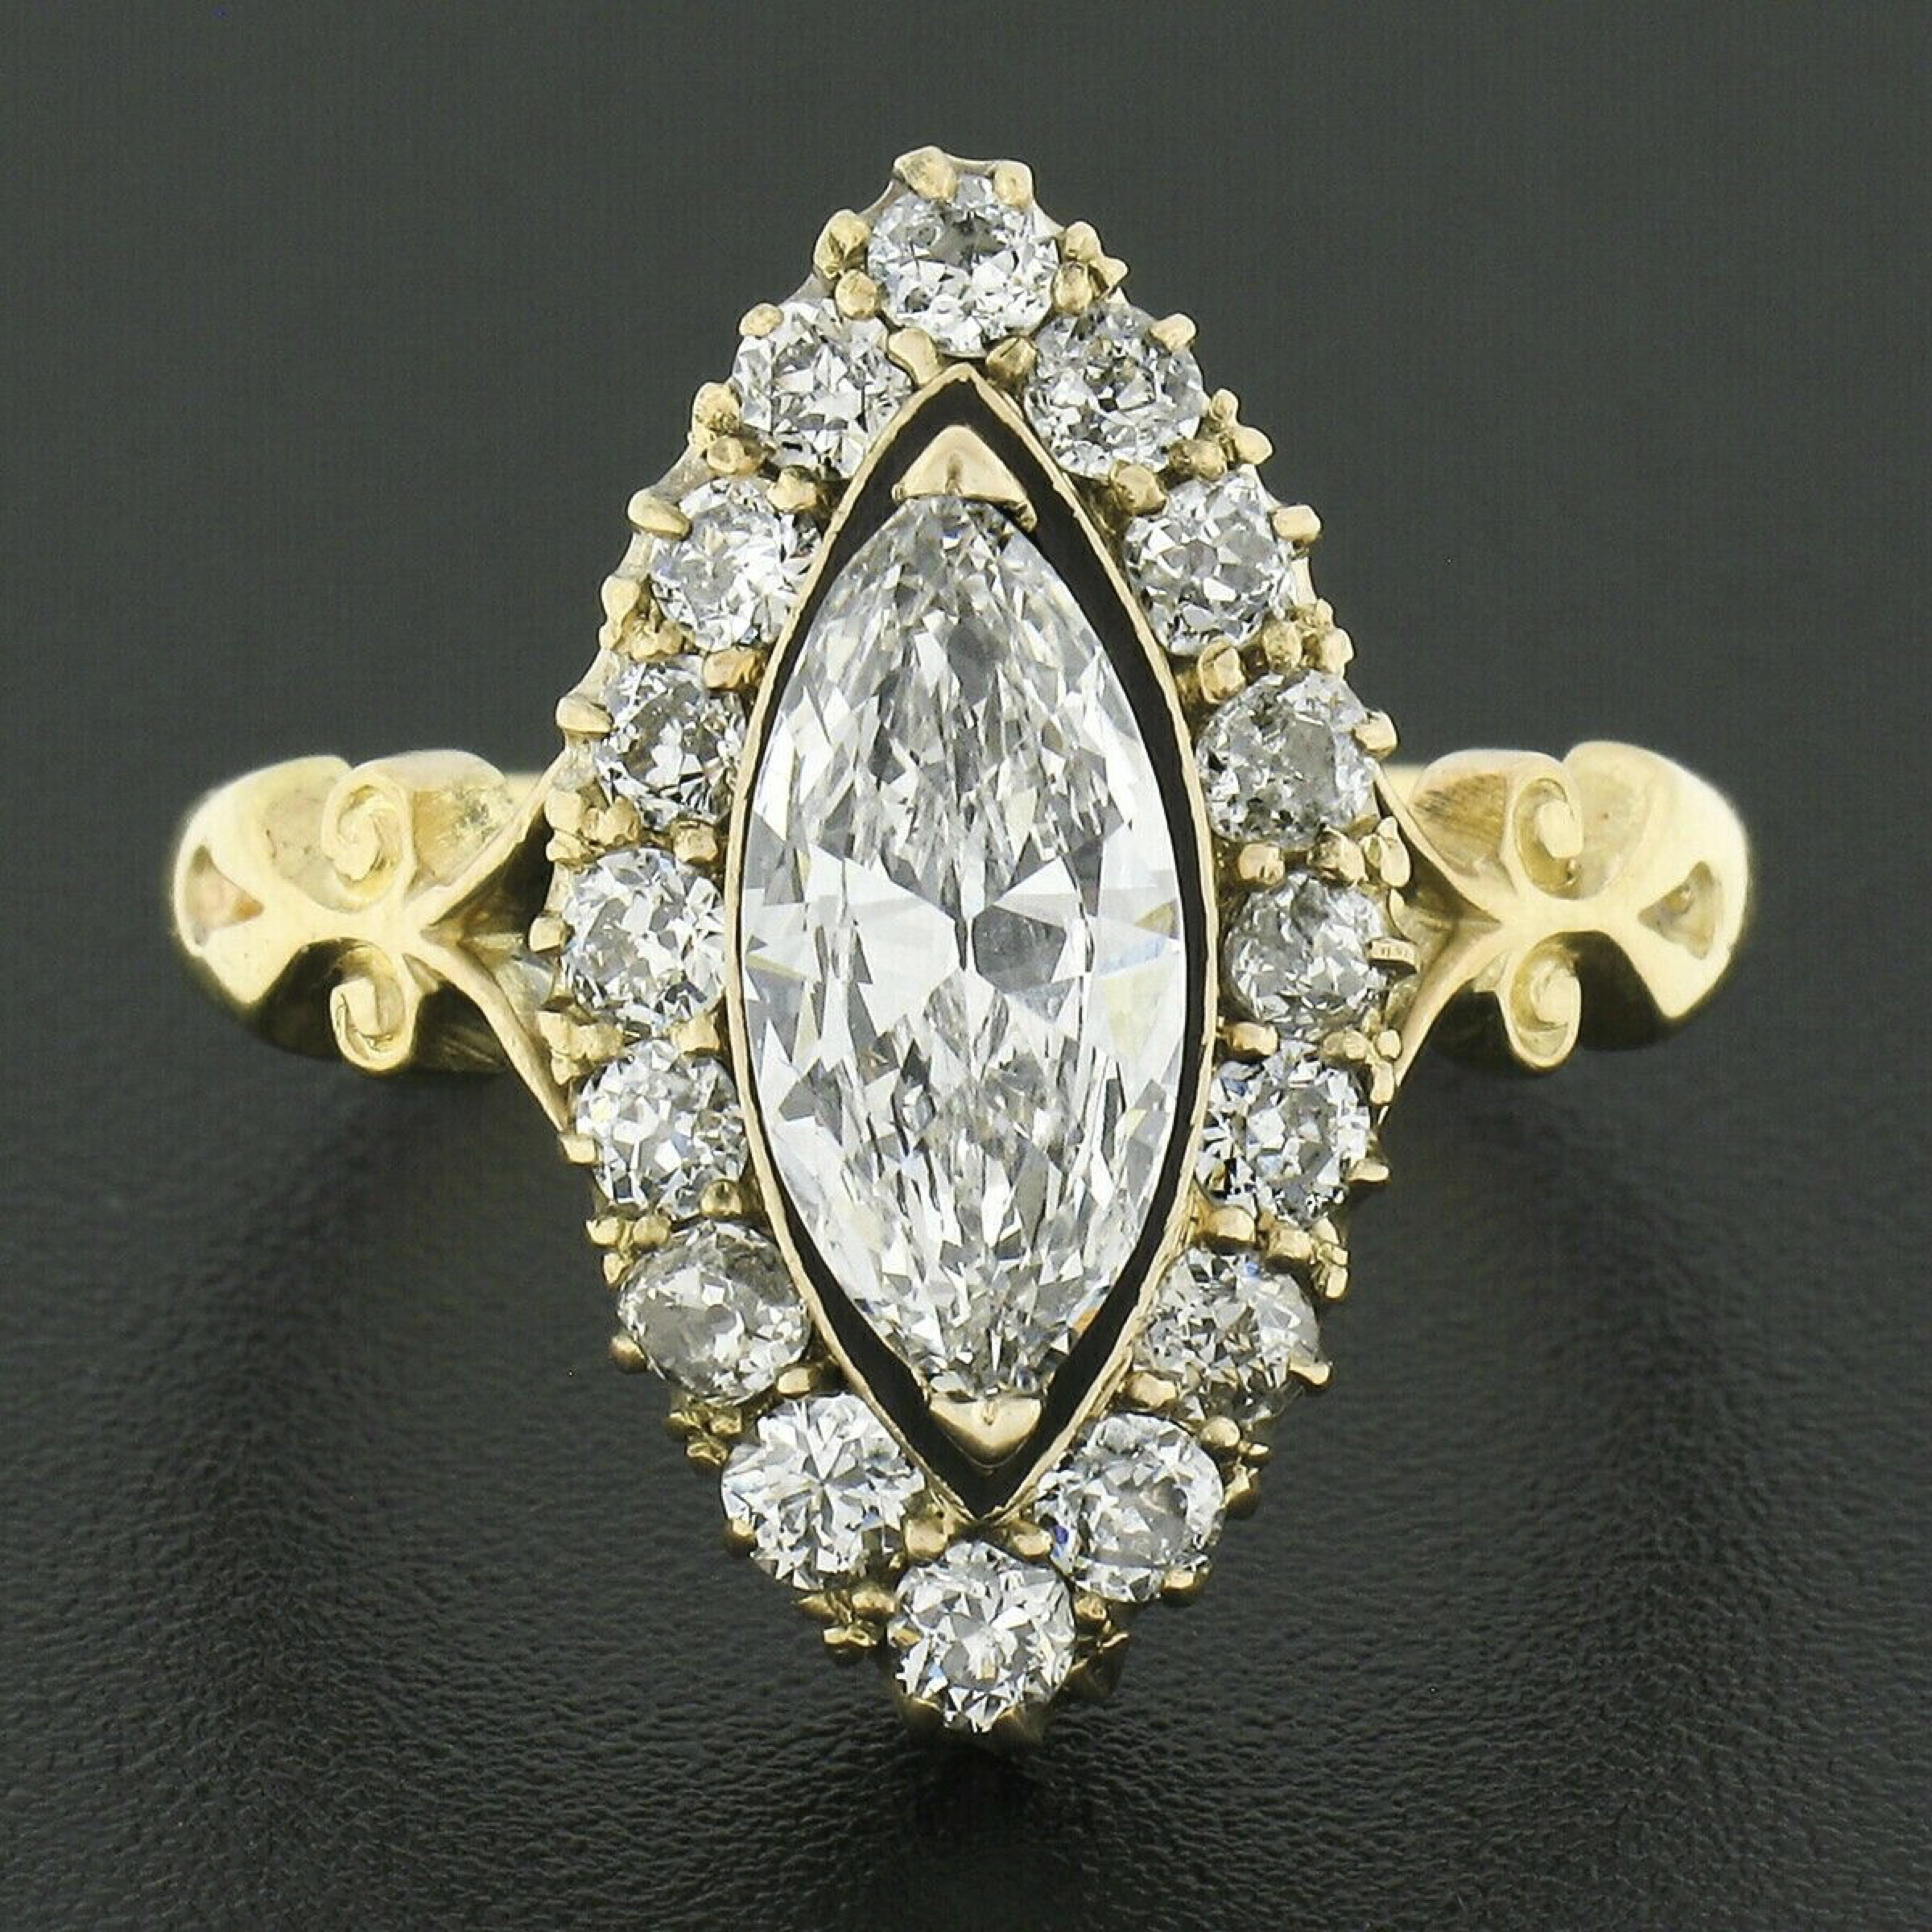 Here we have an absolutely breathtaking and super rare antique engagement ring that was crafted from solid 18k yellow gold dating to the mid 1800's. It features a very fine quality marquise cut diamond solitaire that has been certified by GIA as